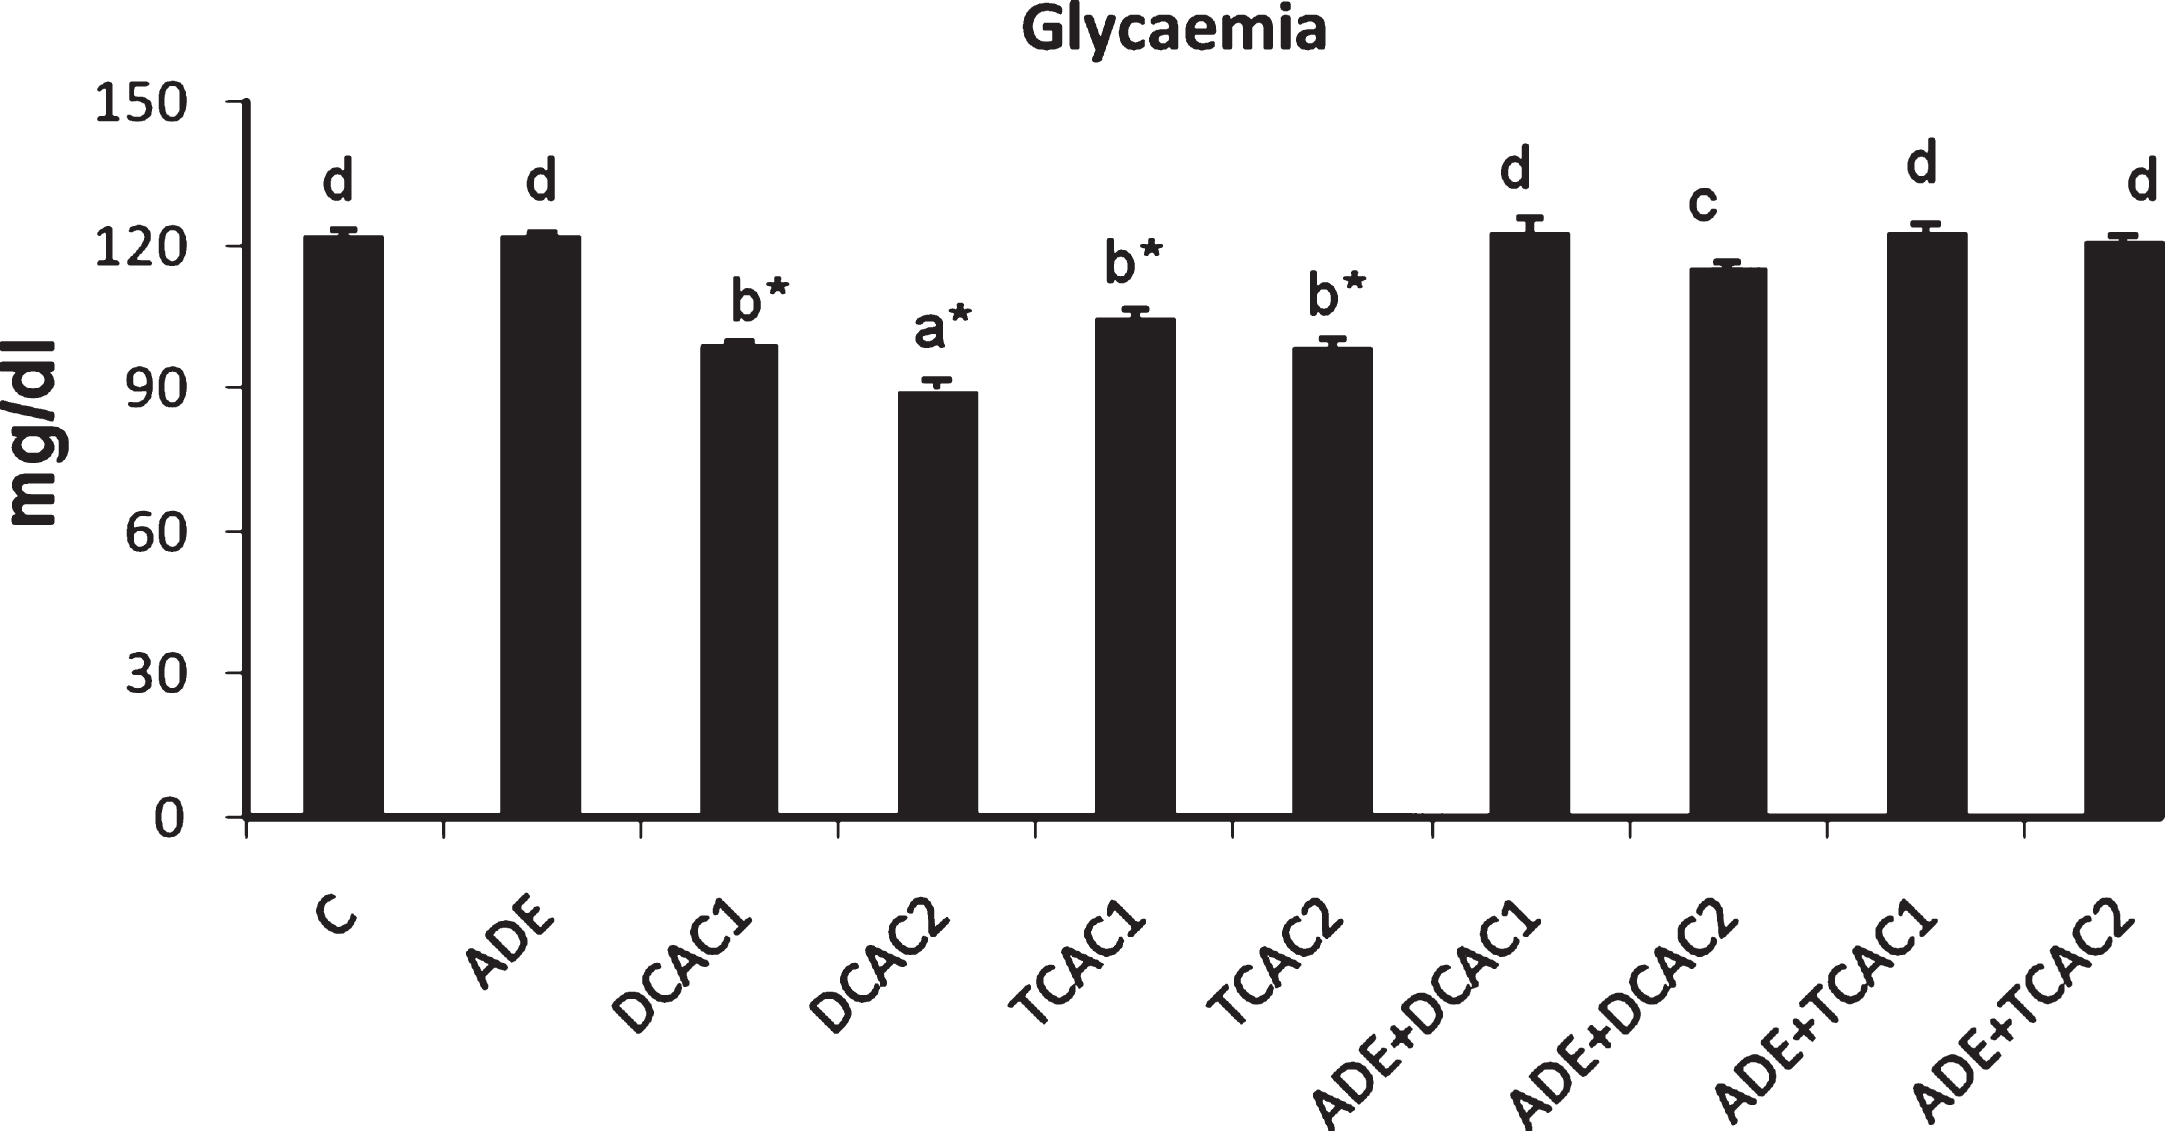 Effect of aqueous date extract on the plasma glucose levels of rats treated with DCA and TCA at 0.5 or 2 g/L. Data are reported as the mean±SD of eight animals in each group. Bars not sharing a common superscript letter (a–d) differ significantly at p < 0.05. C, control; ADE, aqueous date extract; DCAC1, dichloroacetic acid at 0.5 g/L; DCAC2, dichloroacetic acid at 2 g/L, TAC1, trichloroacetic acid at 0.5 g/L, TAC2, trichloroacetic acid at 2 g/L. *Significant difference (p < 0.05) compared to control group.